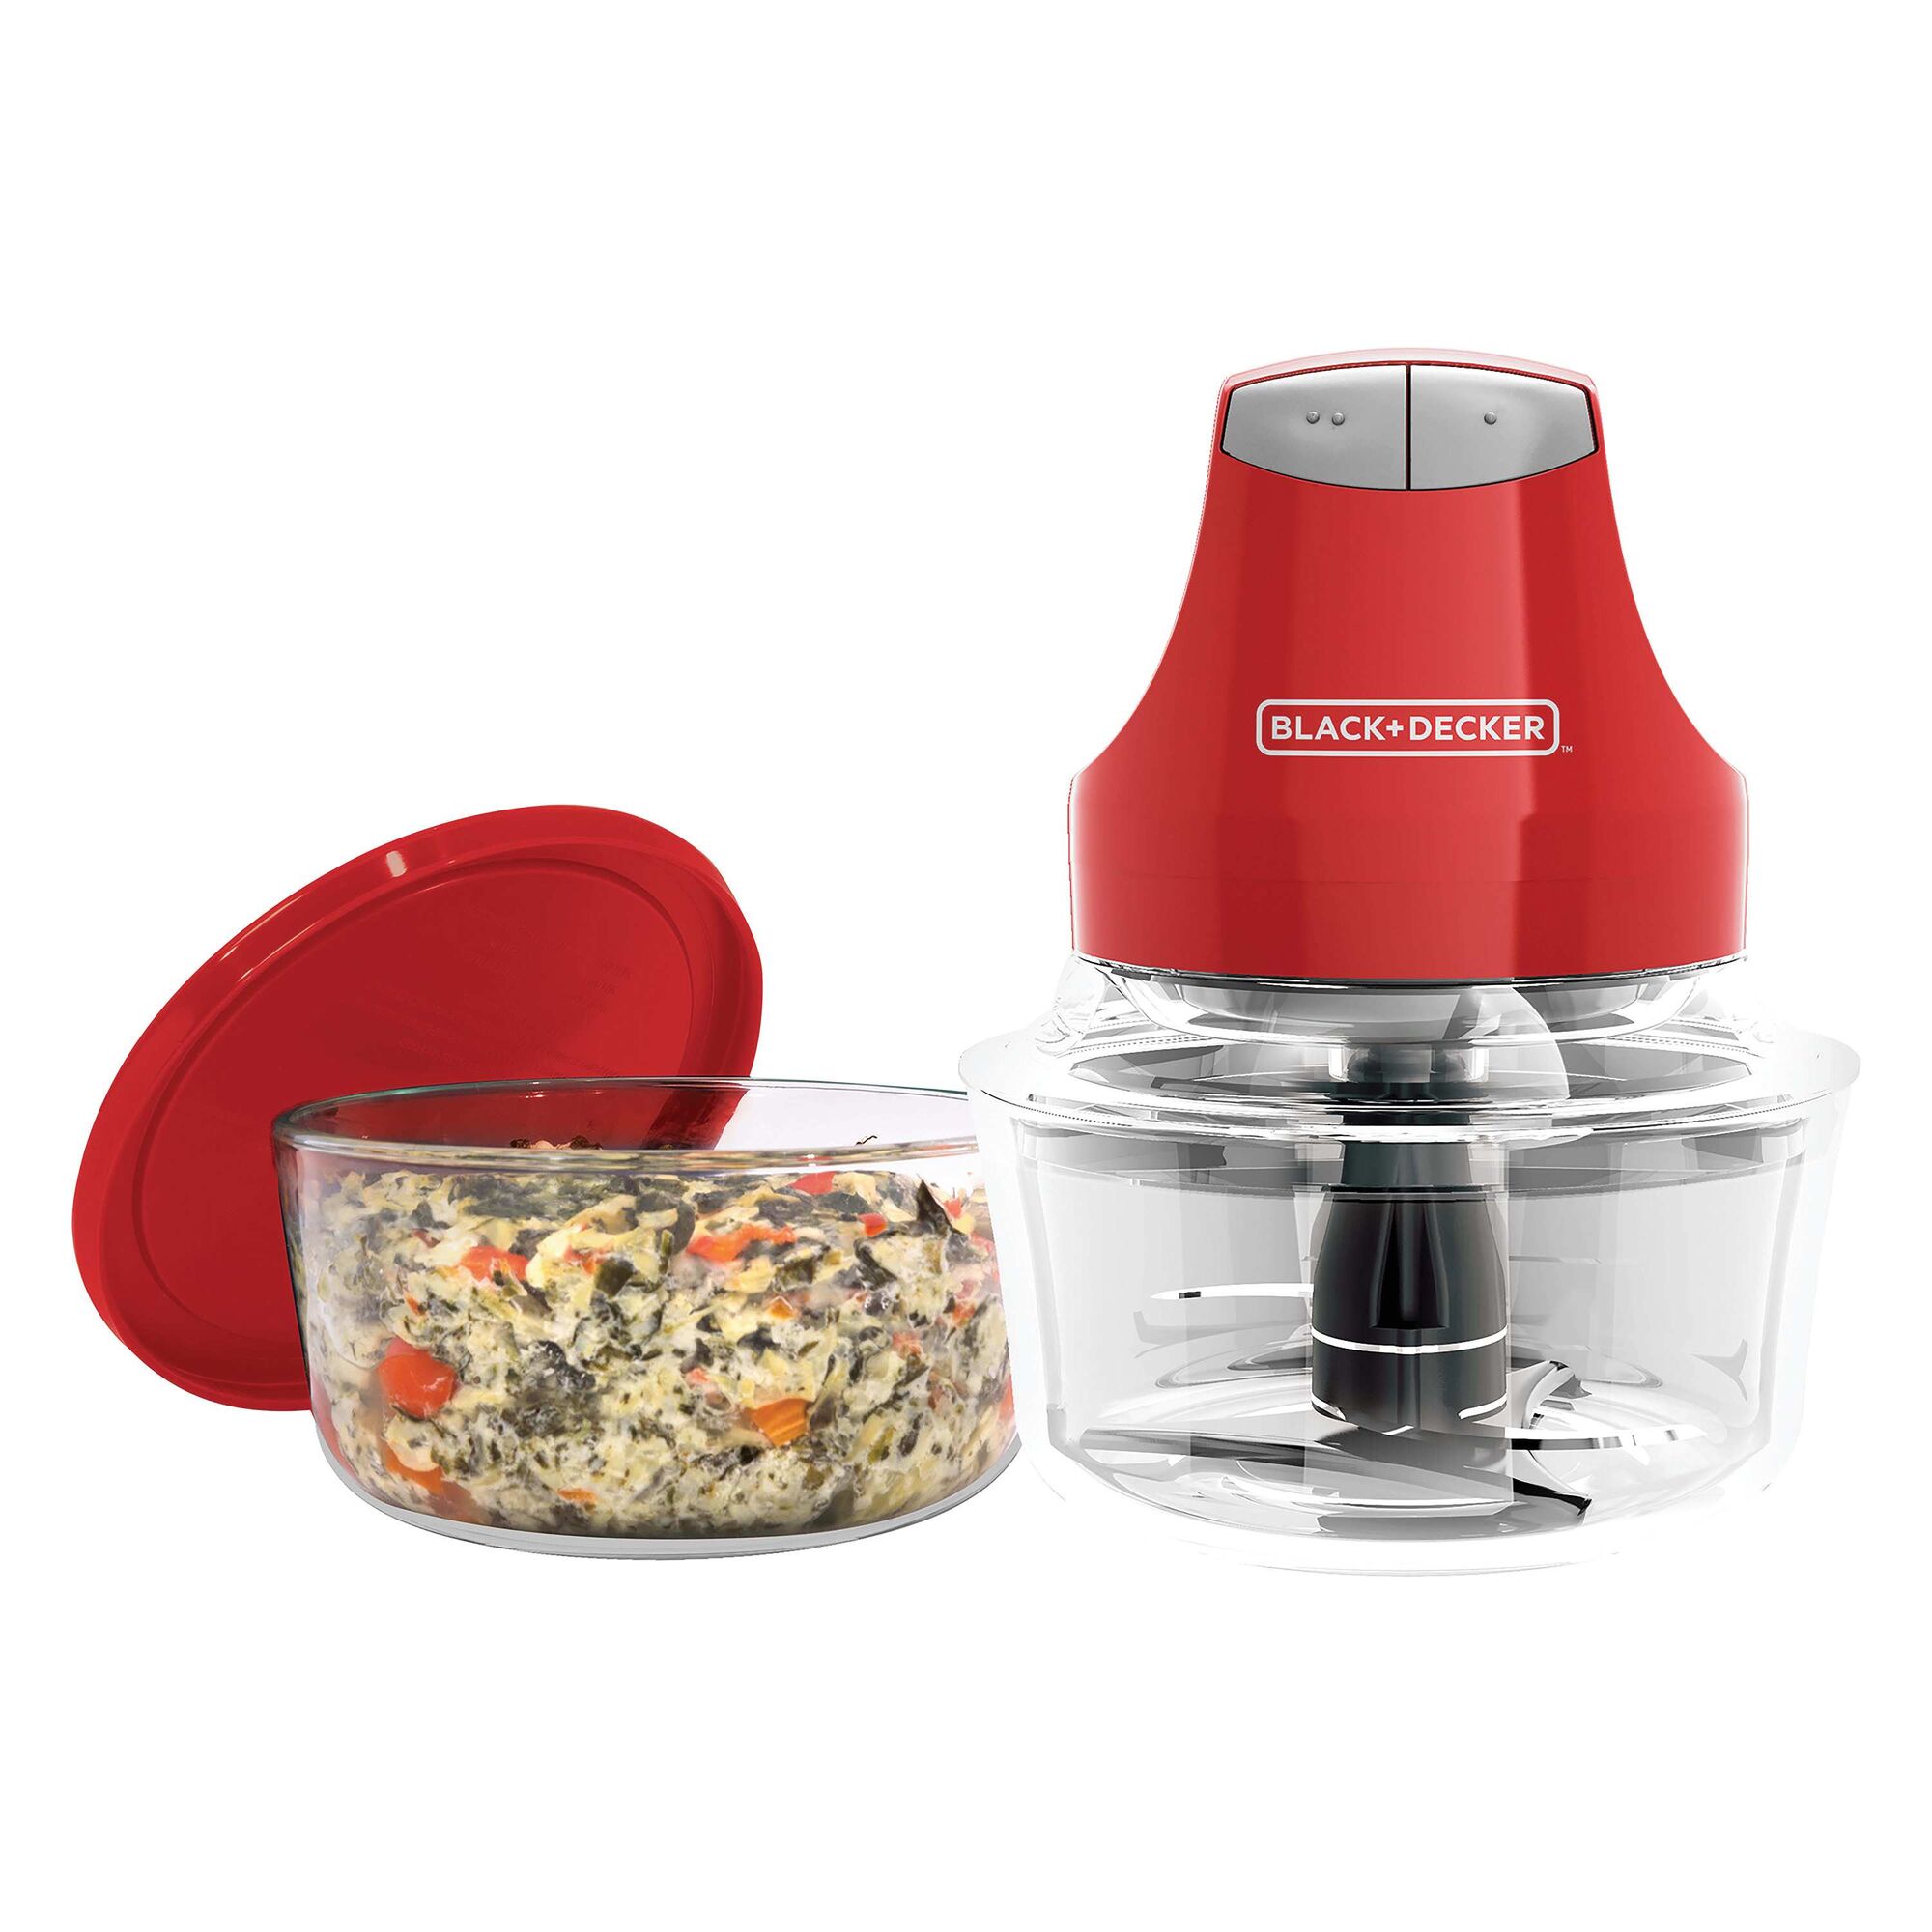 Glass bowl chopper with chopped vegetables.